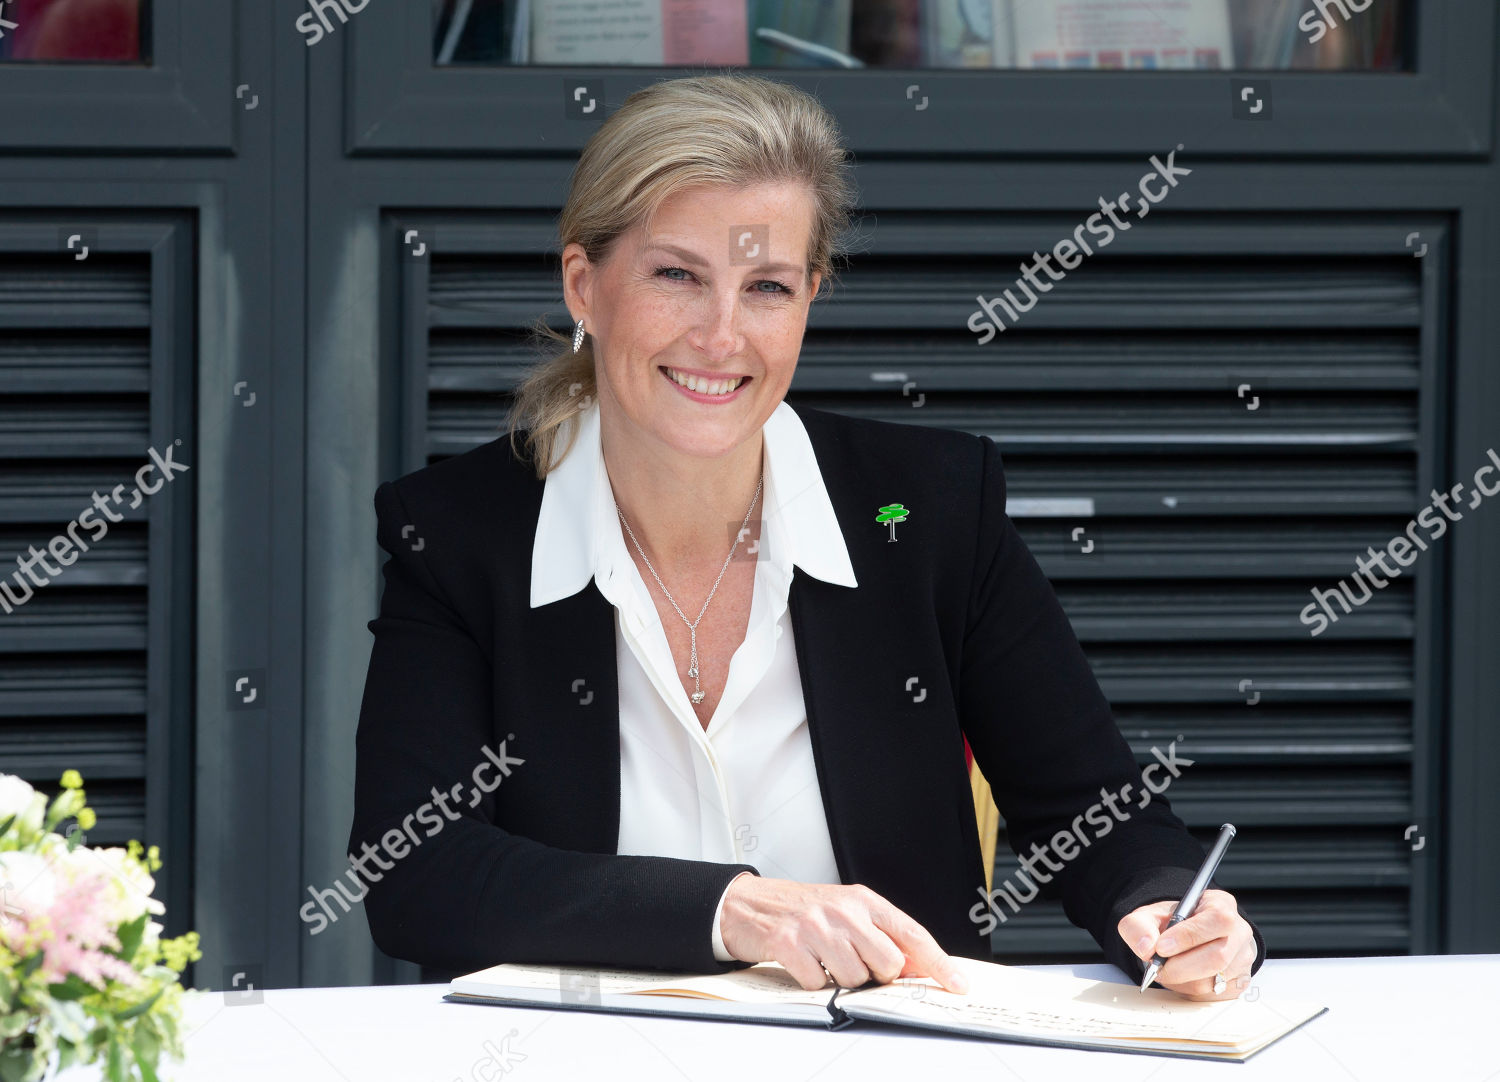 sophie-countess-of-wessex-visits-the-treloar-trust-college-holybourne-uk-shutterstock-editorial-10279529ab.jpg